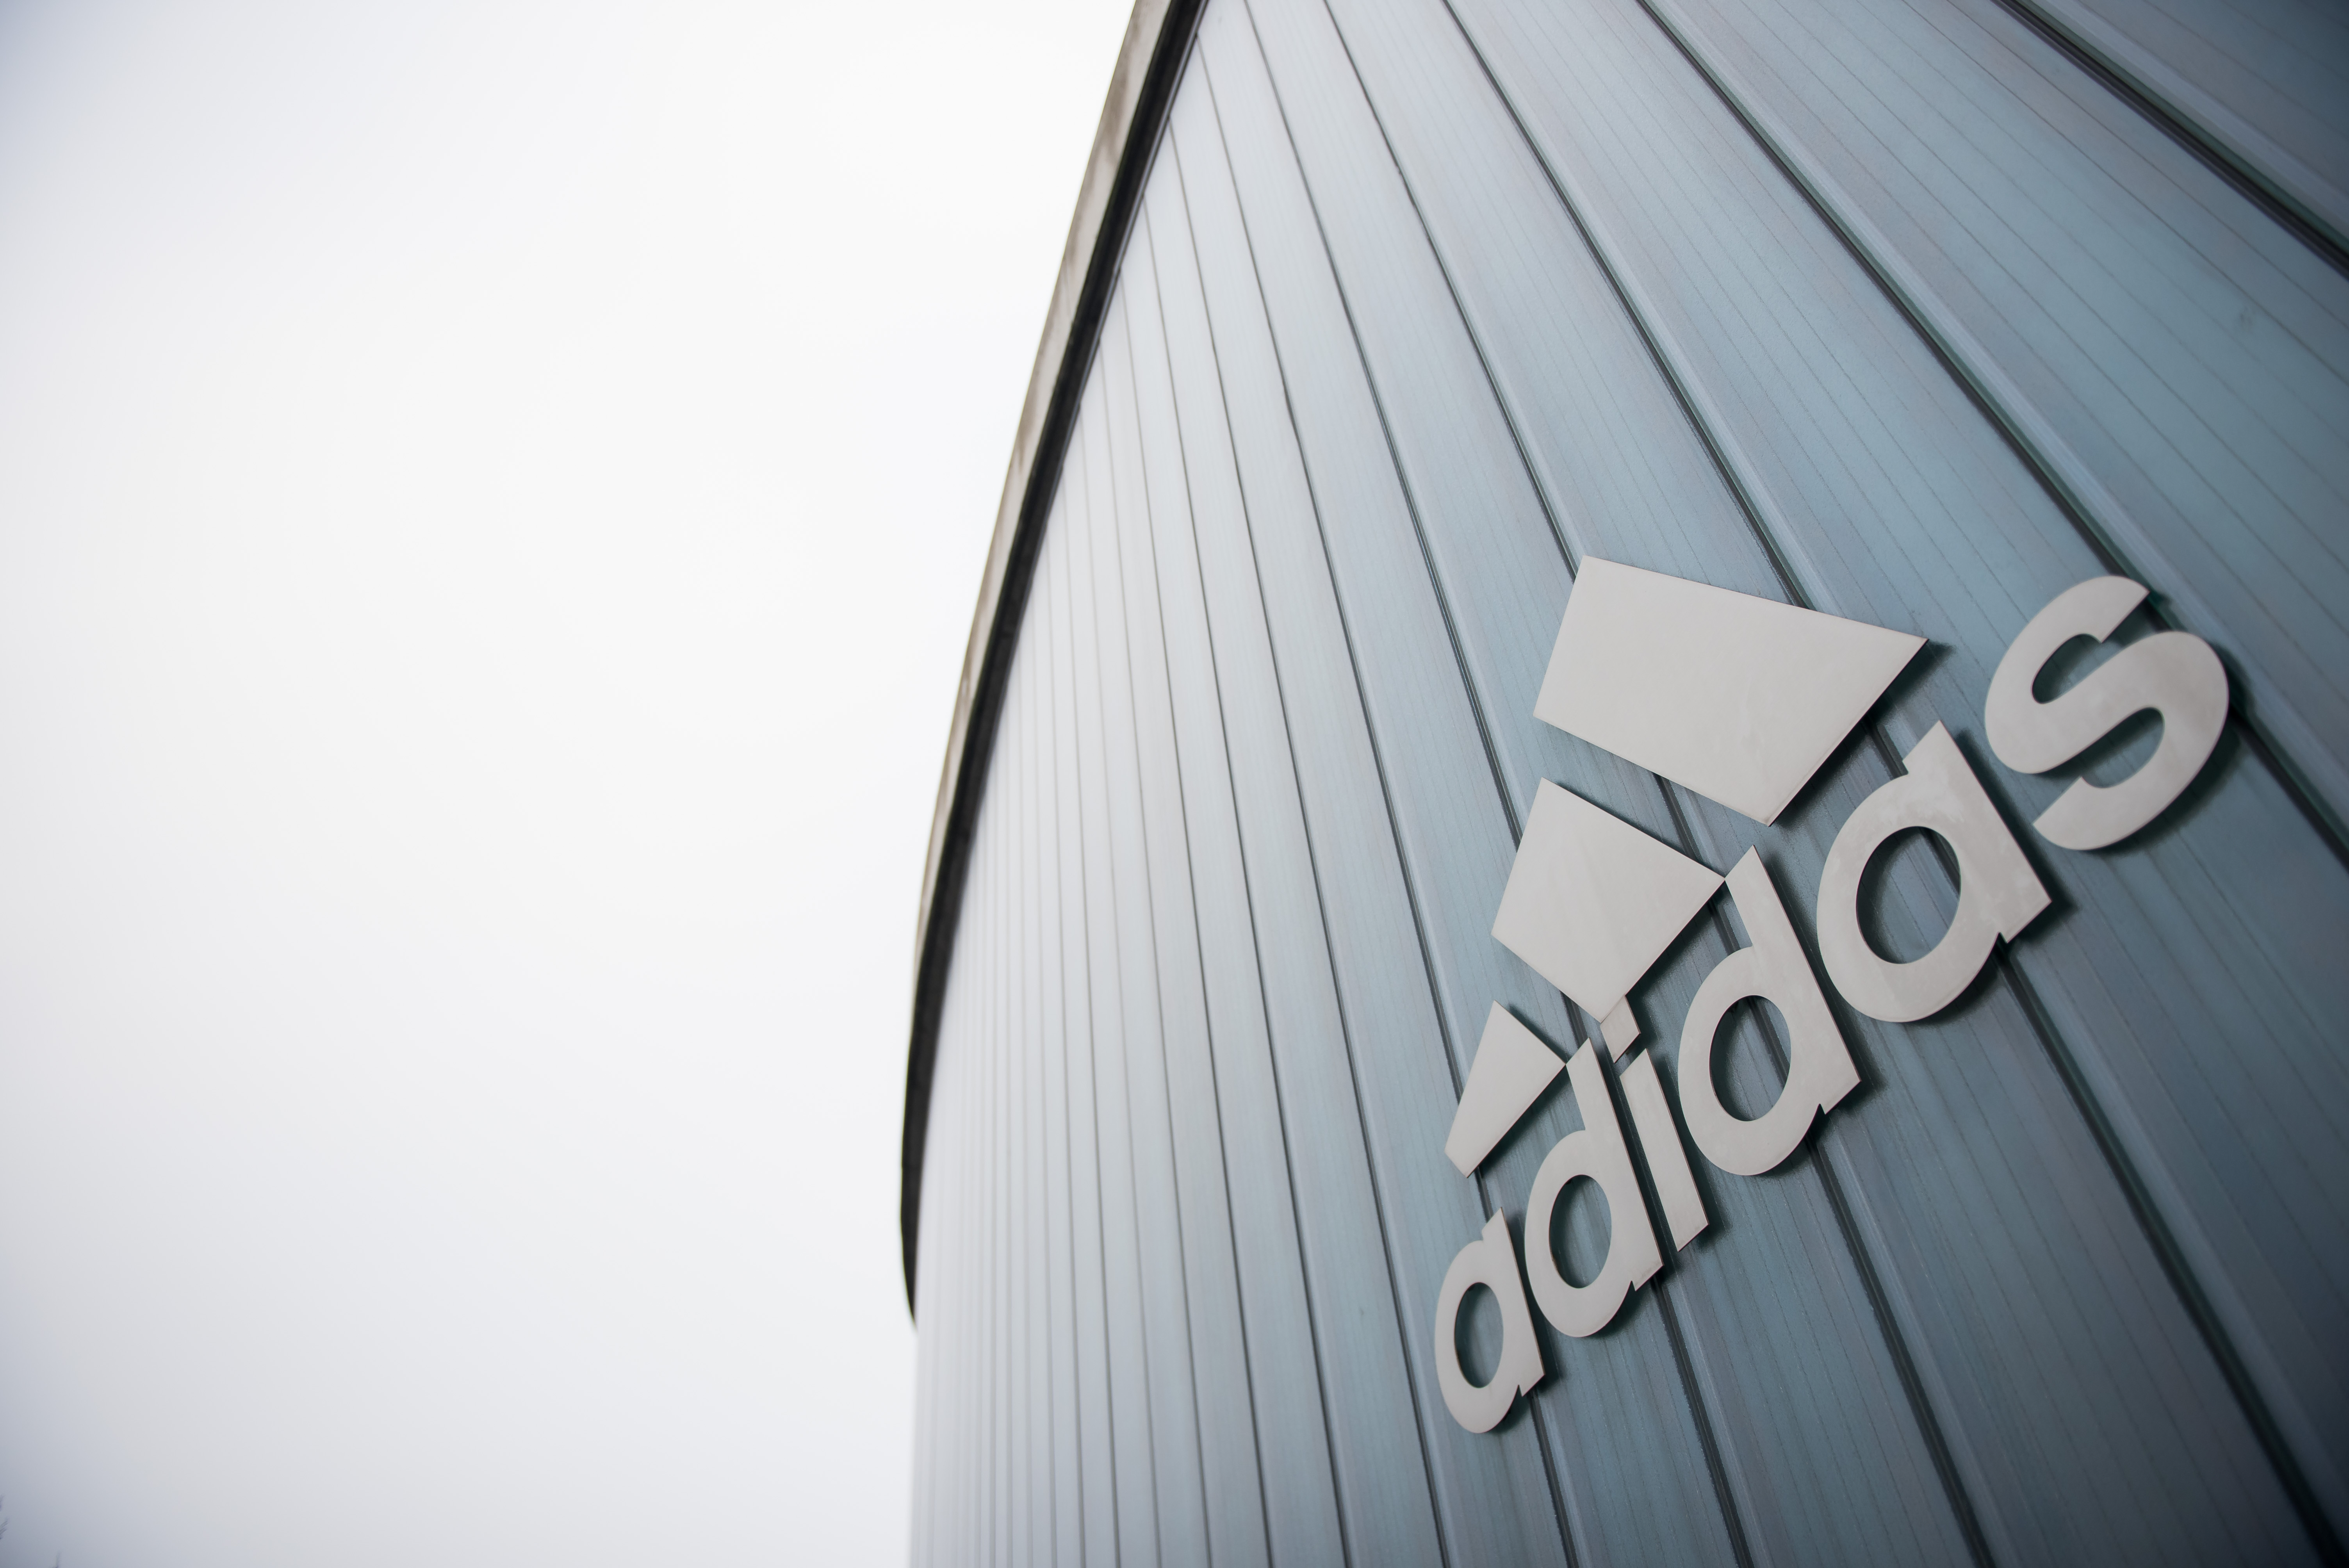 The logo of German sport brand Adidas is pictured on an Outlet Center in Herzogenaurach on January 25, 2016.  / AFP PHOTO / LUKAS BARTH